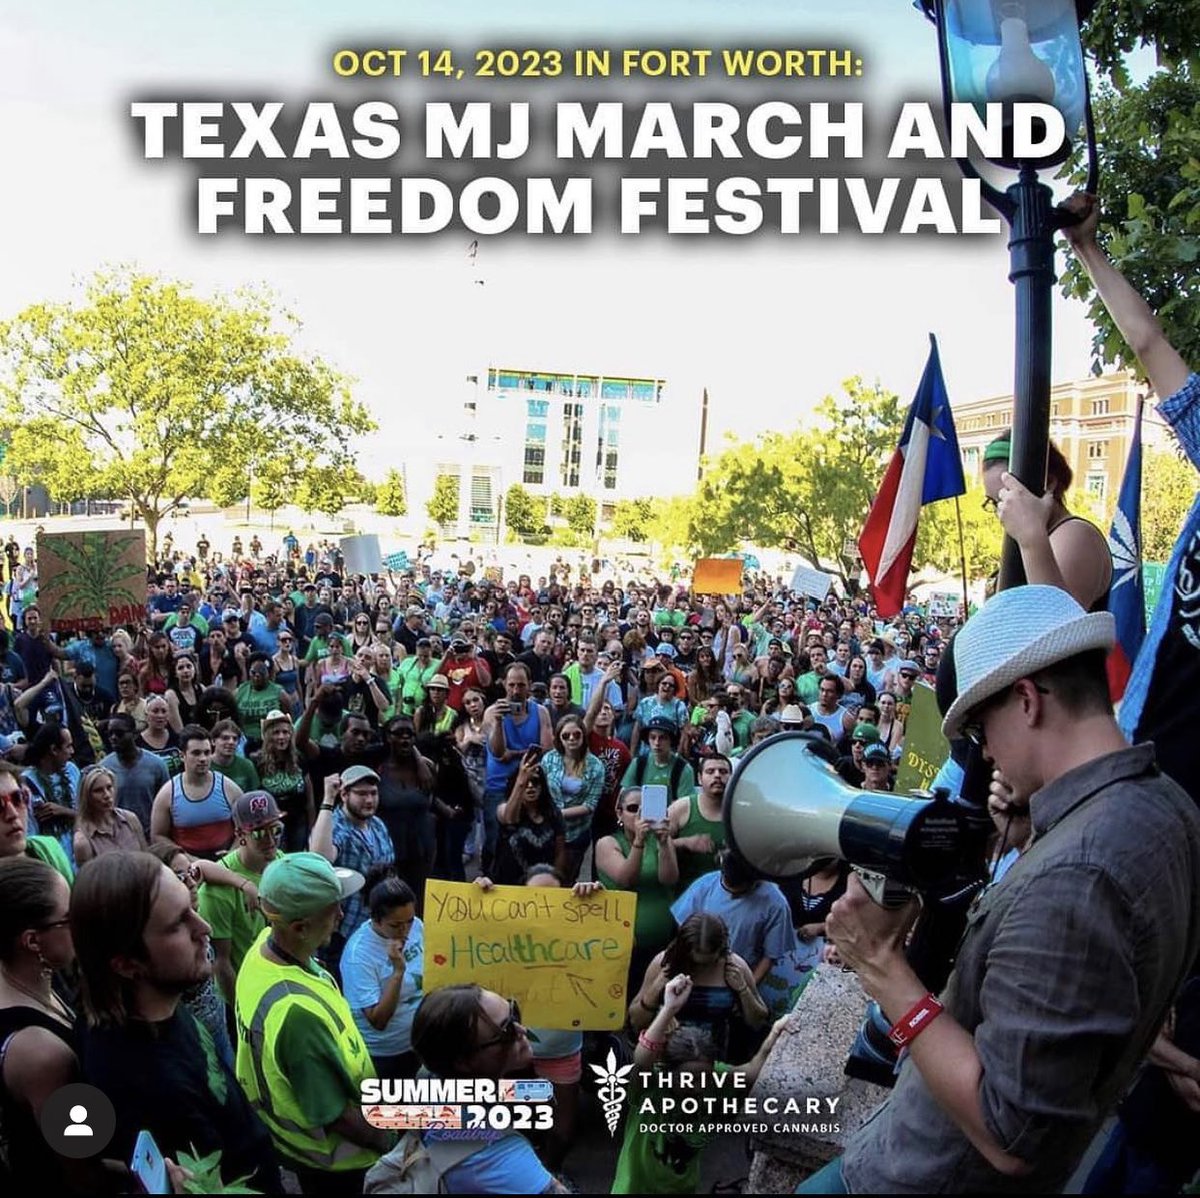 Come check us out this Saturday at the MJ March in Ft Worth. We will be handing out supplies, listening to some amazing speakers and providing our support! 
#harmreductionsaveslives #harmreductionworks #chooselife #chooseharmreduction